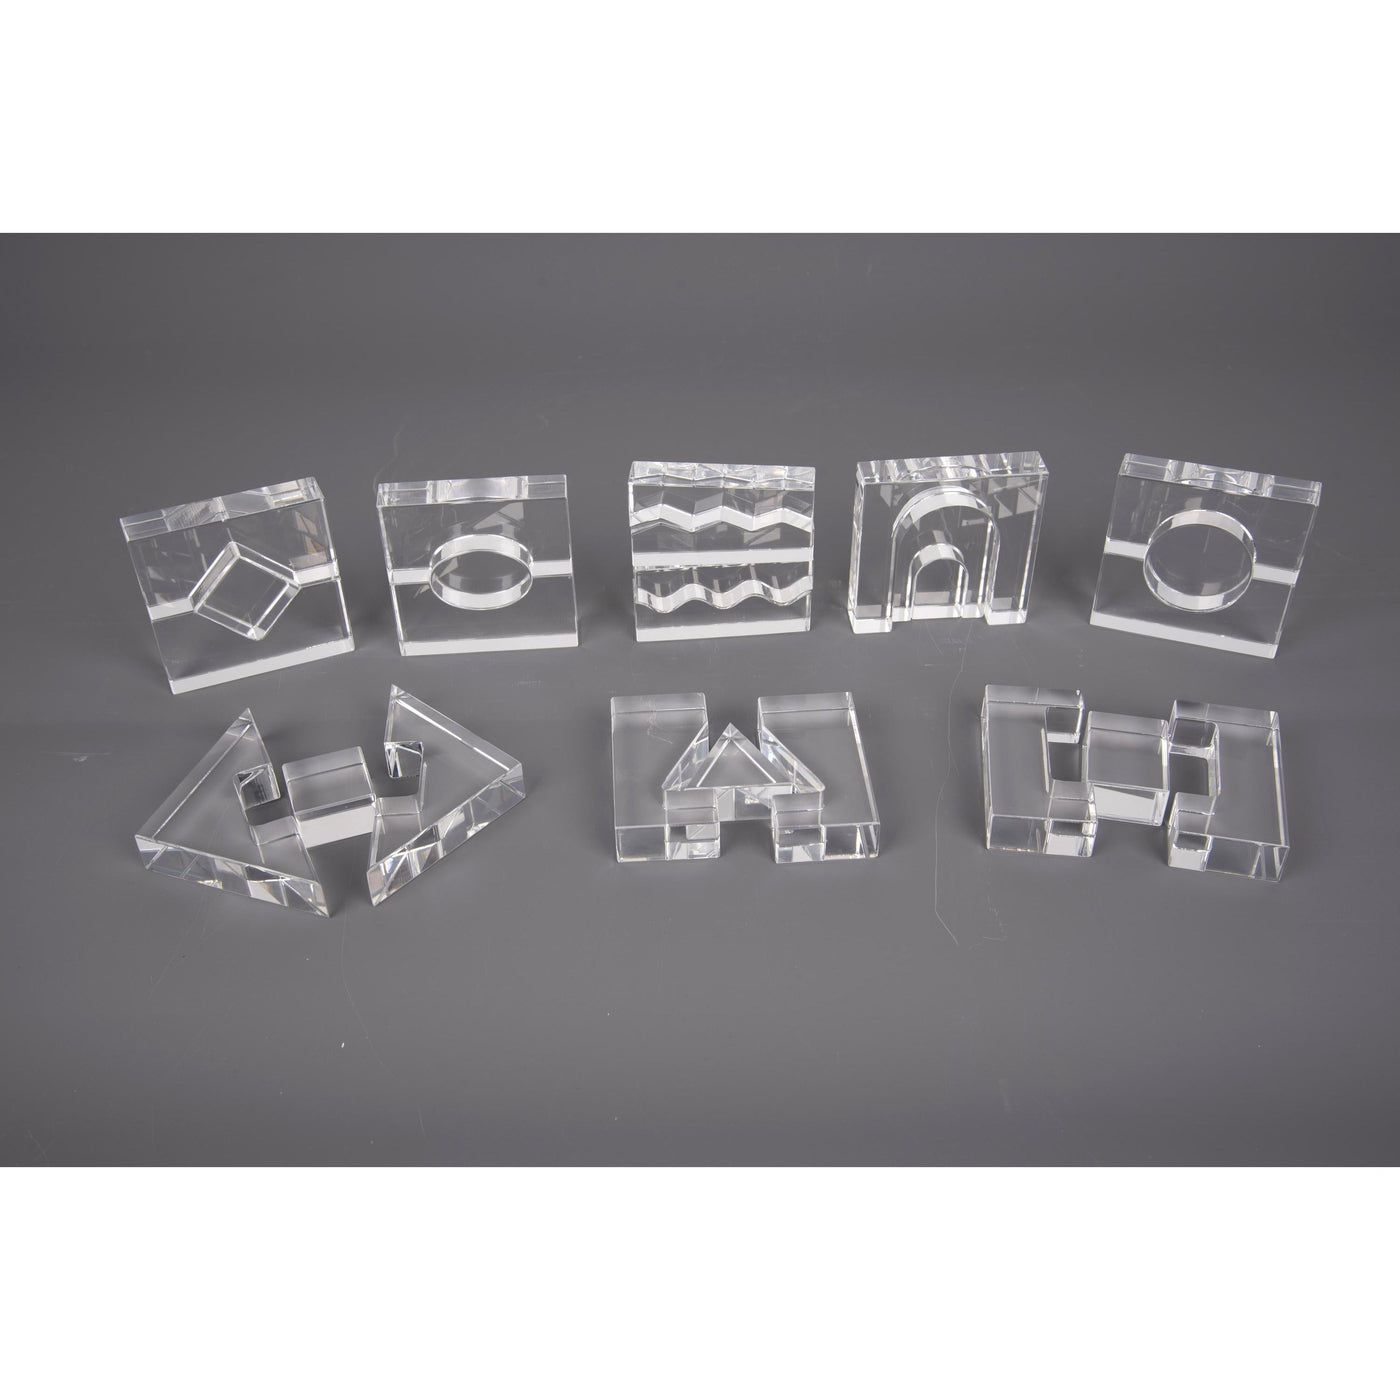 TickiT Clear Crystal Block Set - Perfect for Exploring Light